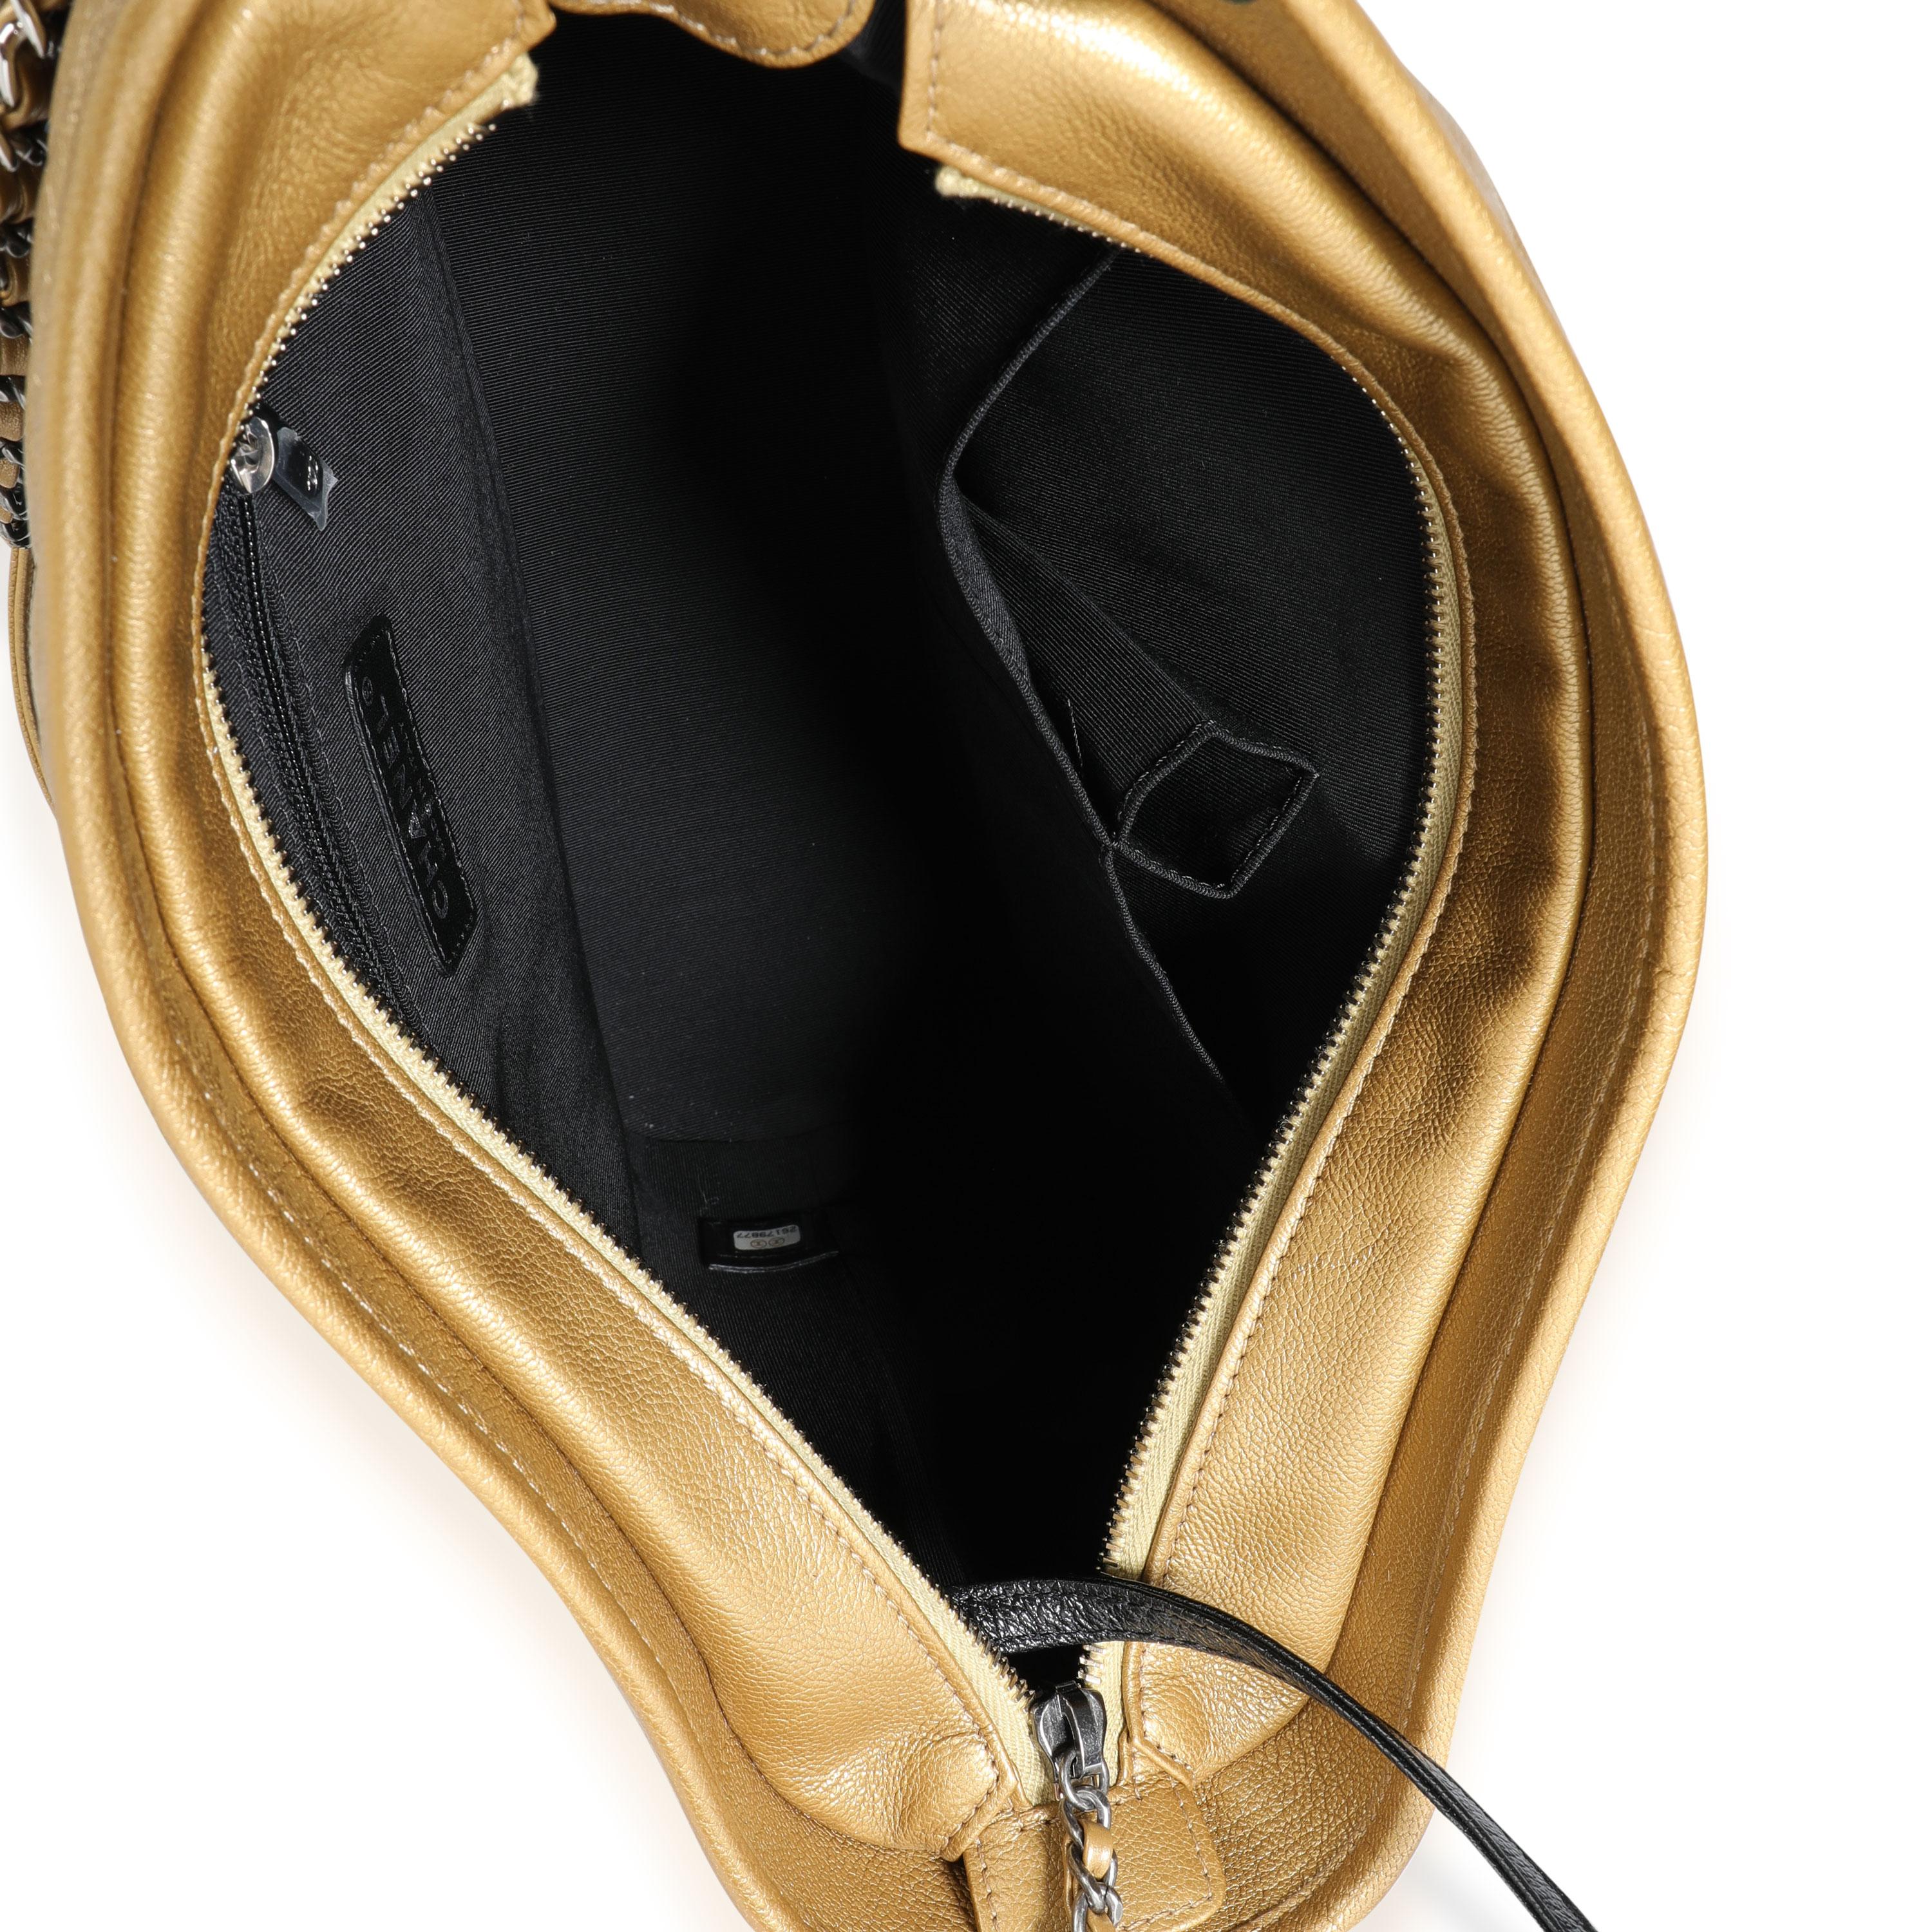 Chanel Black & Gold Ombré Quilted Goatskin Medium Gabrielle Hobo In Excellent Condition For Sale In New York, NY